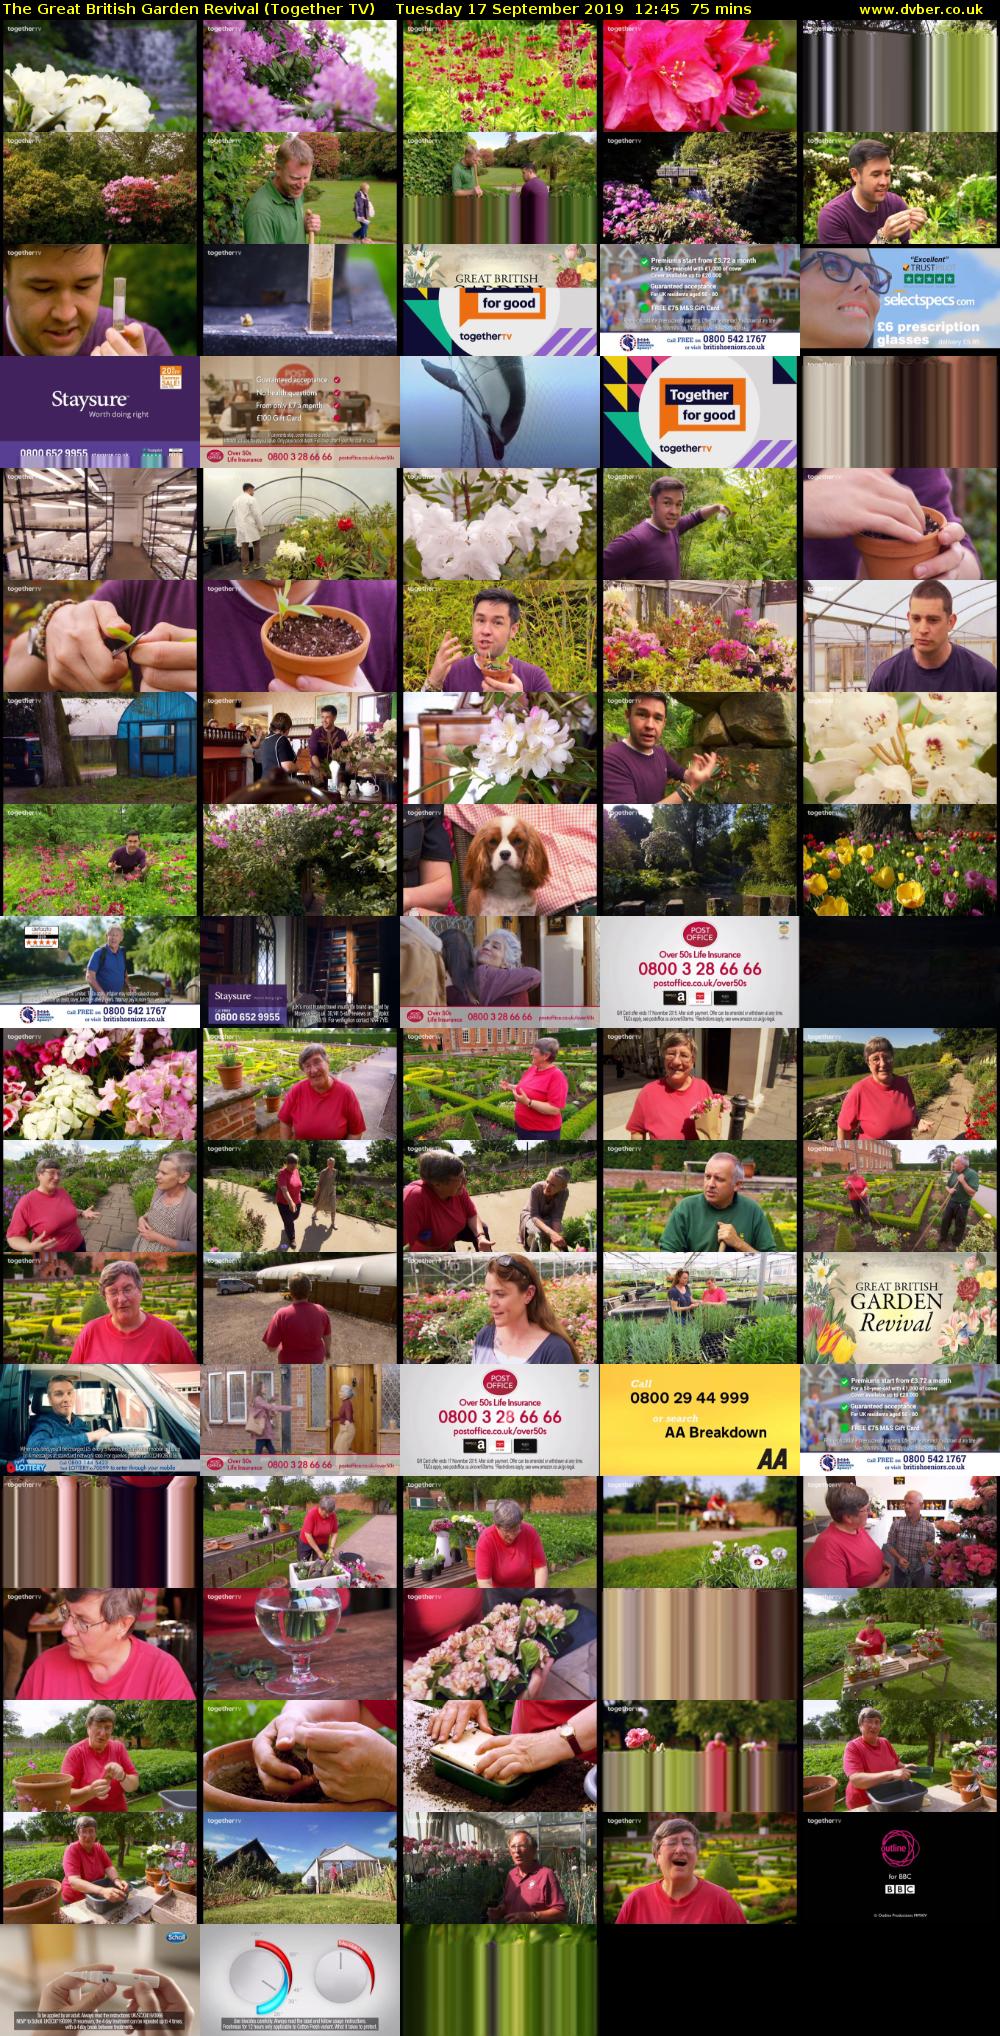 The Great British Garden Revival (Together TV) Tuesday 17 September 2019 12:45 - 14:00